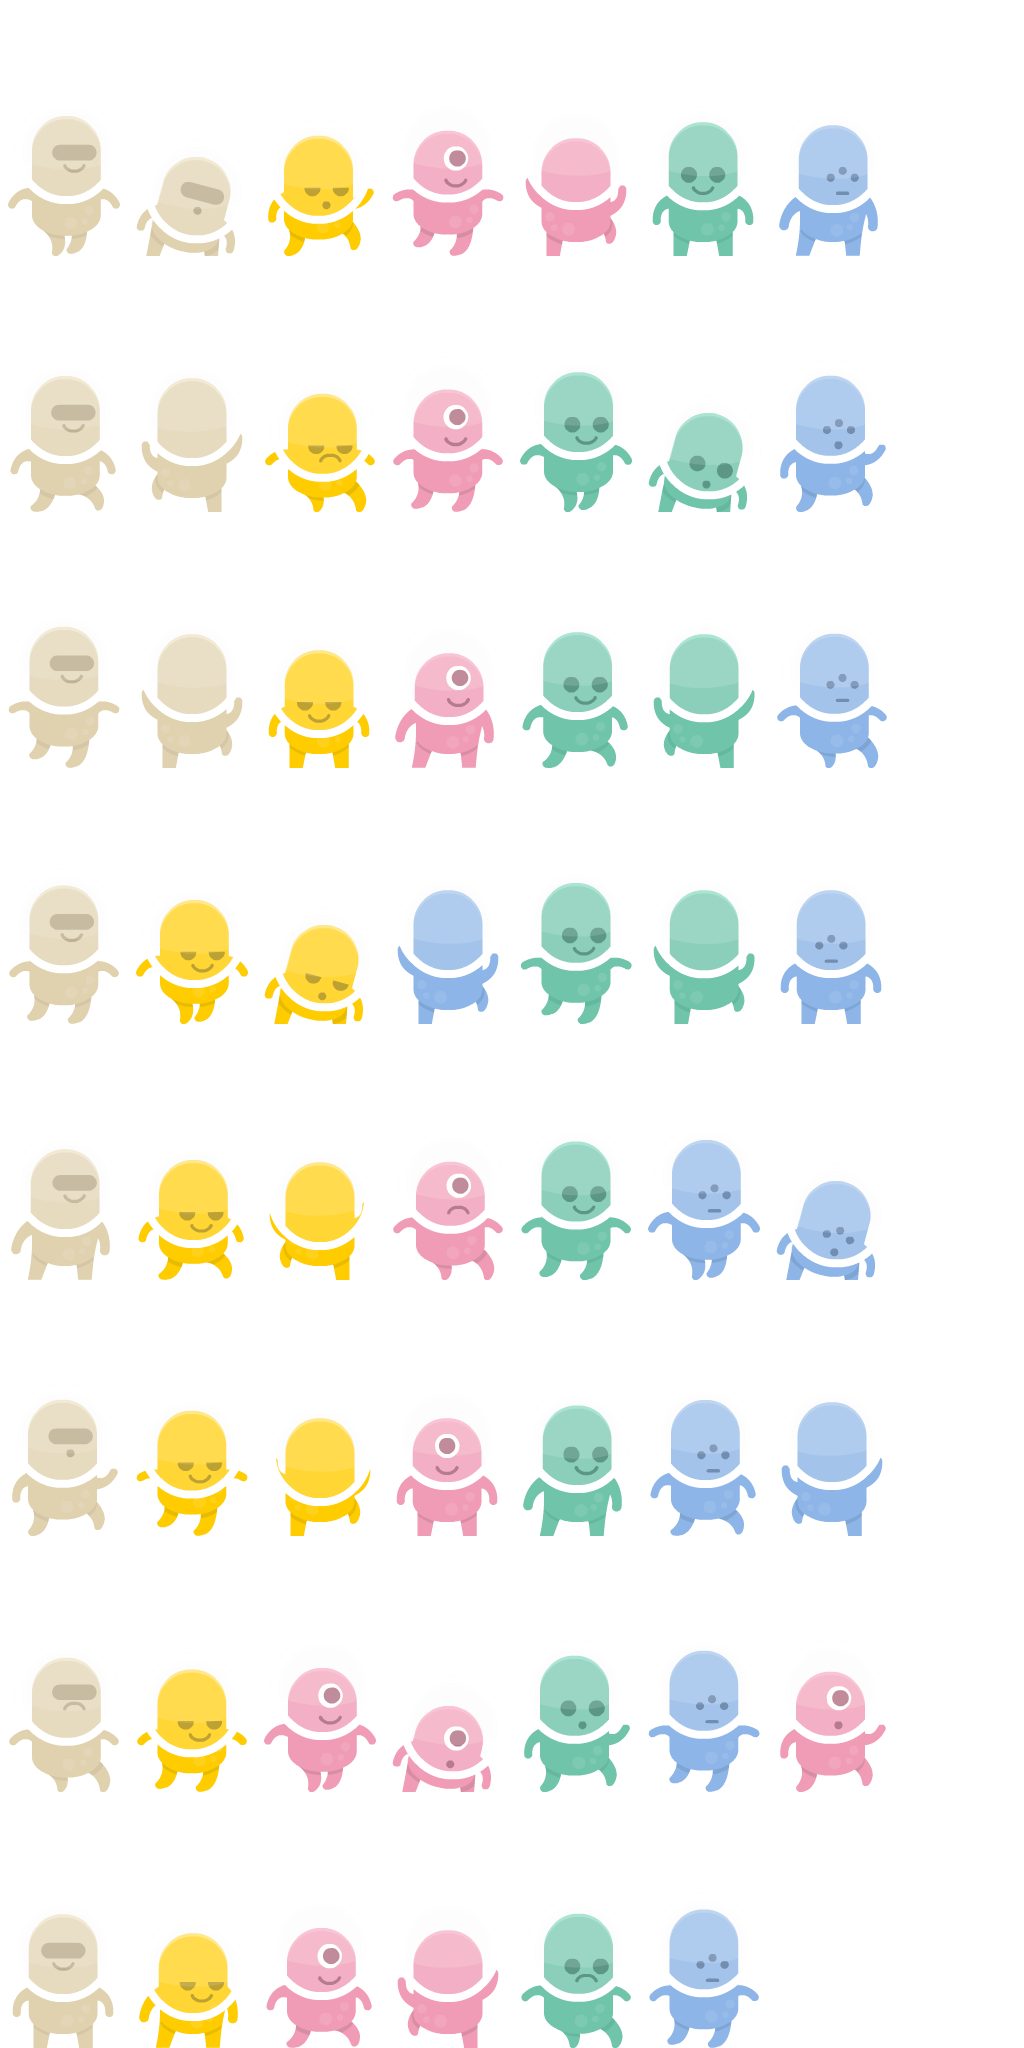 A spritesheet showing different aliens in different poses